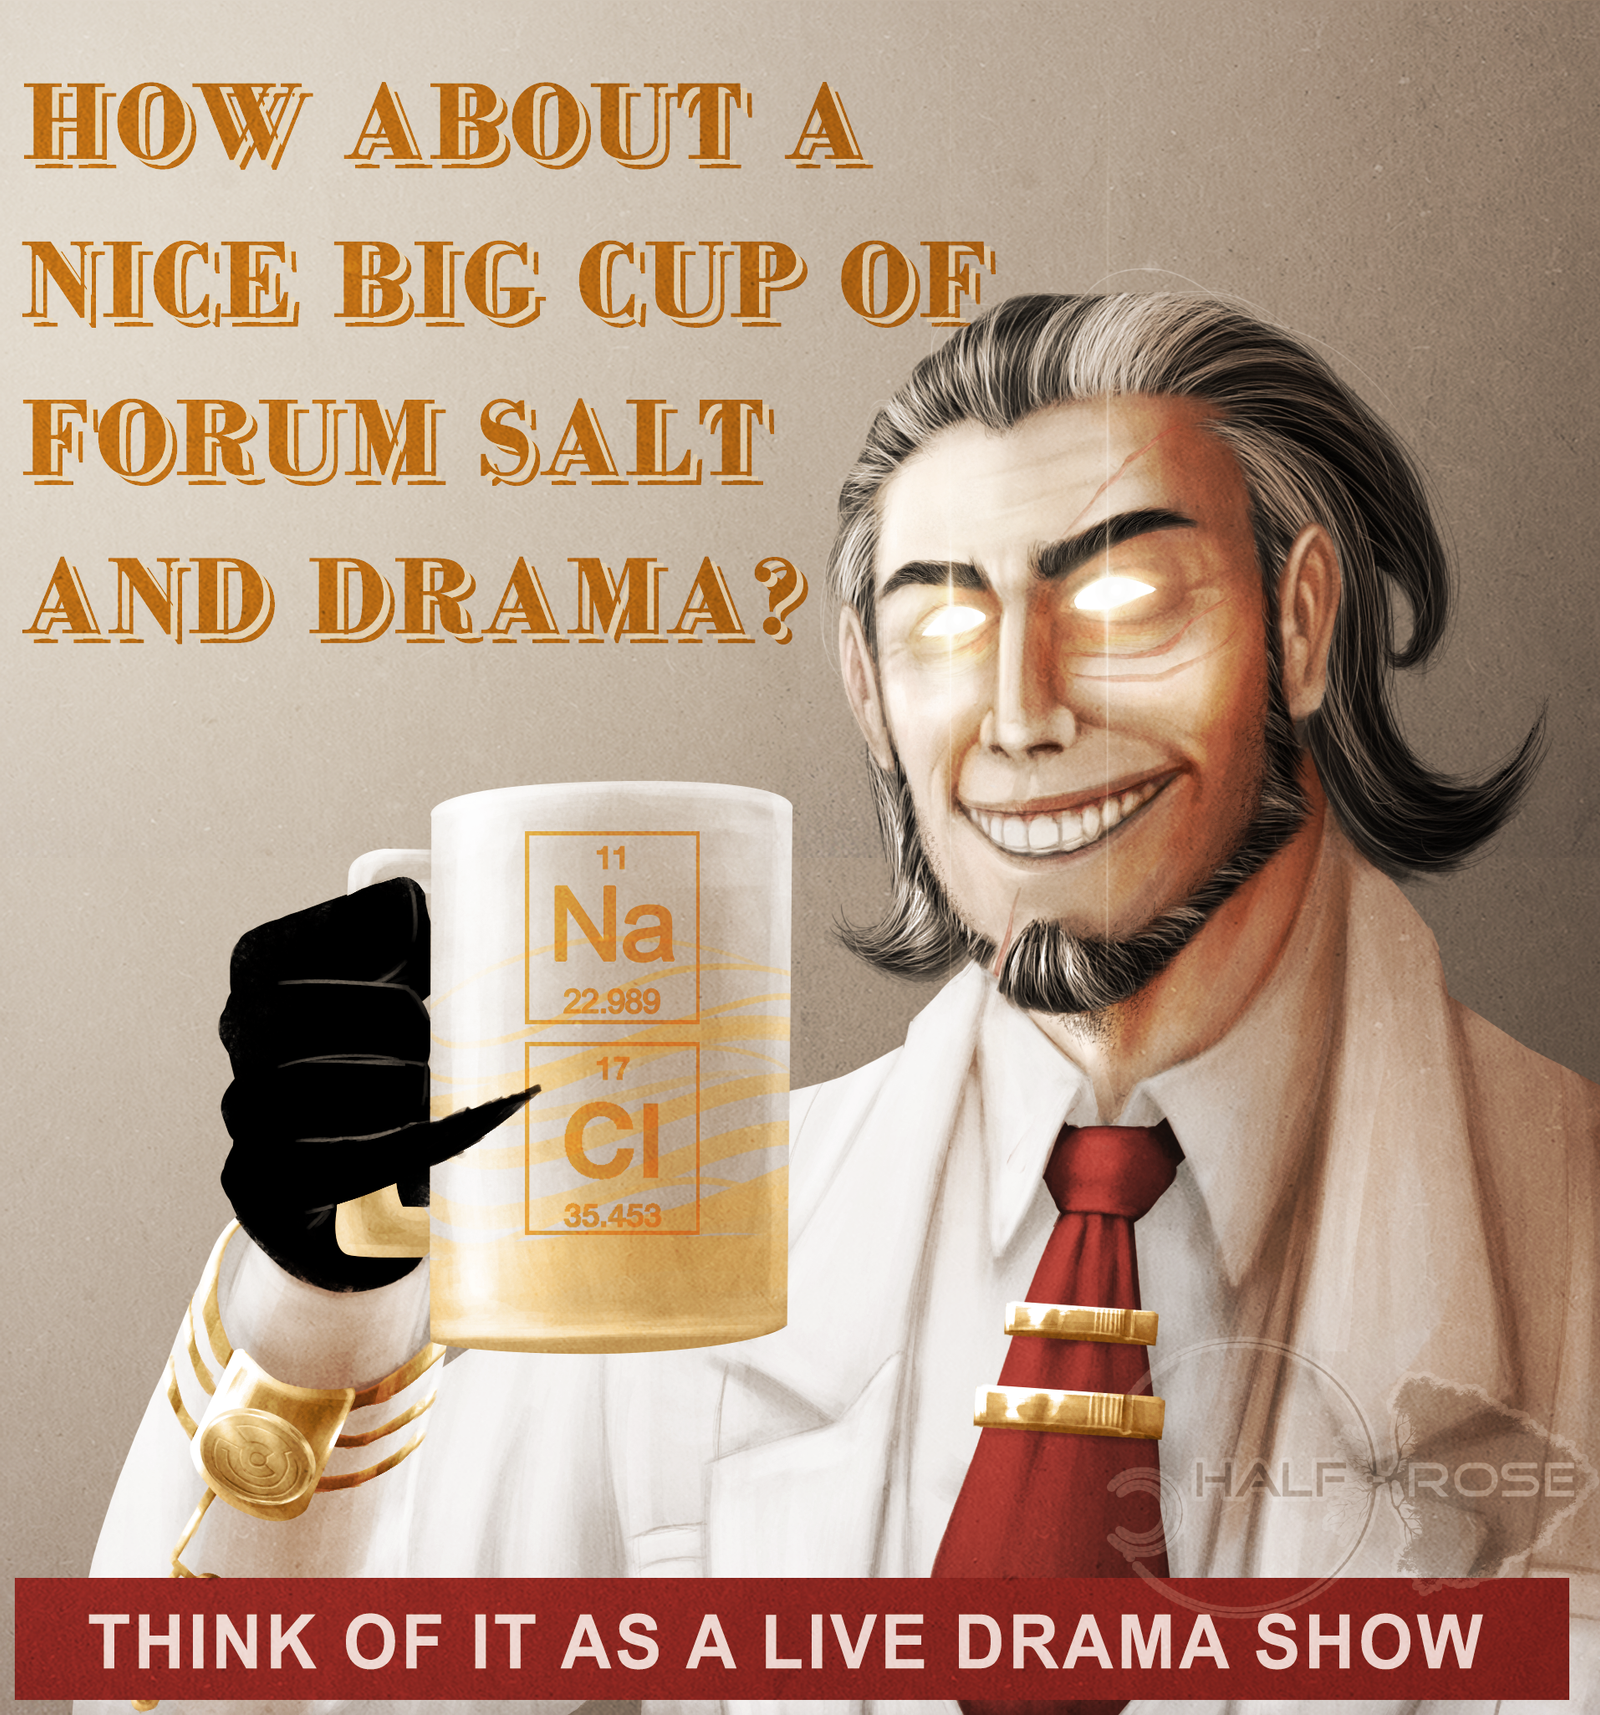 big_cup_of_forum_salt_and_drama_by_half_